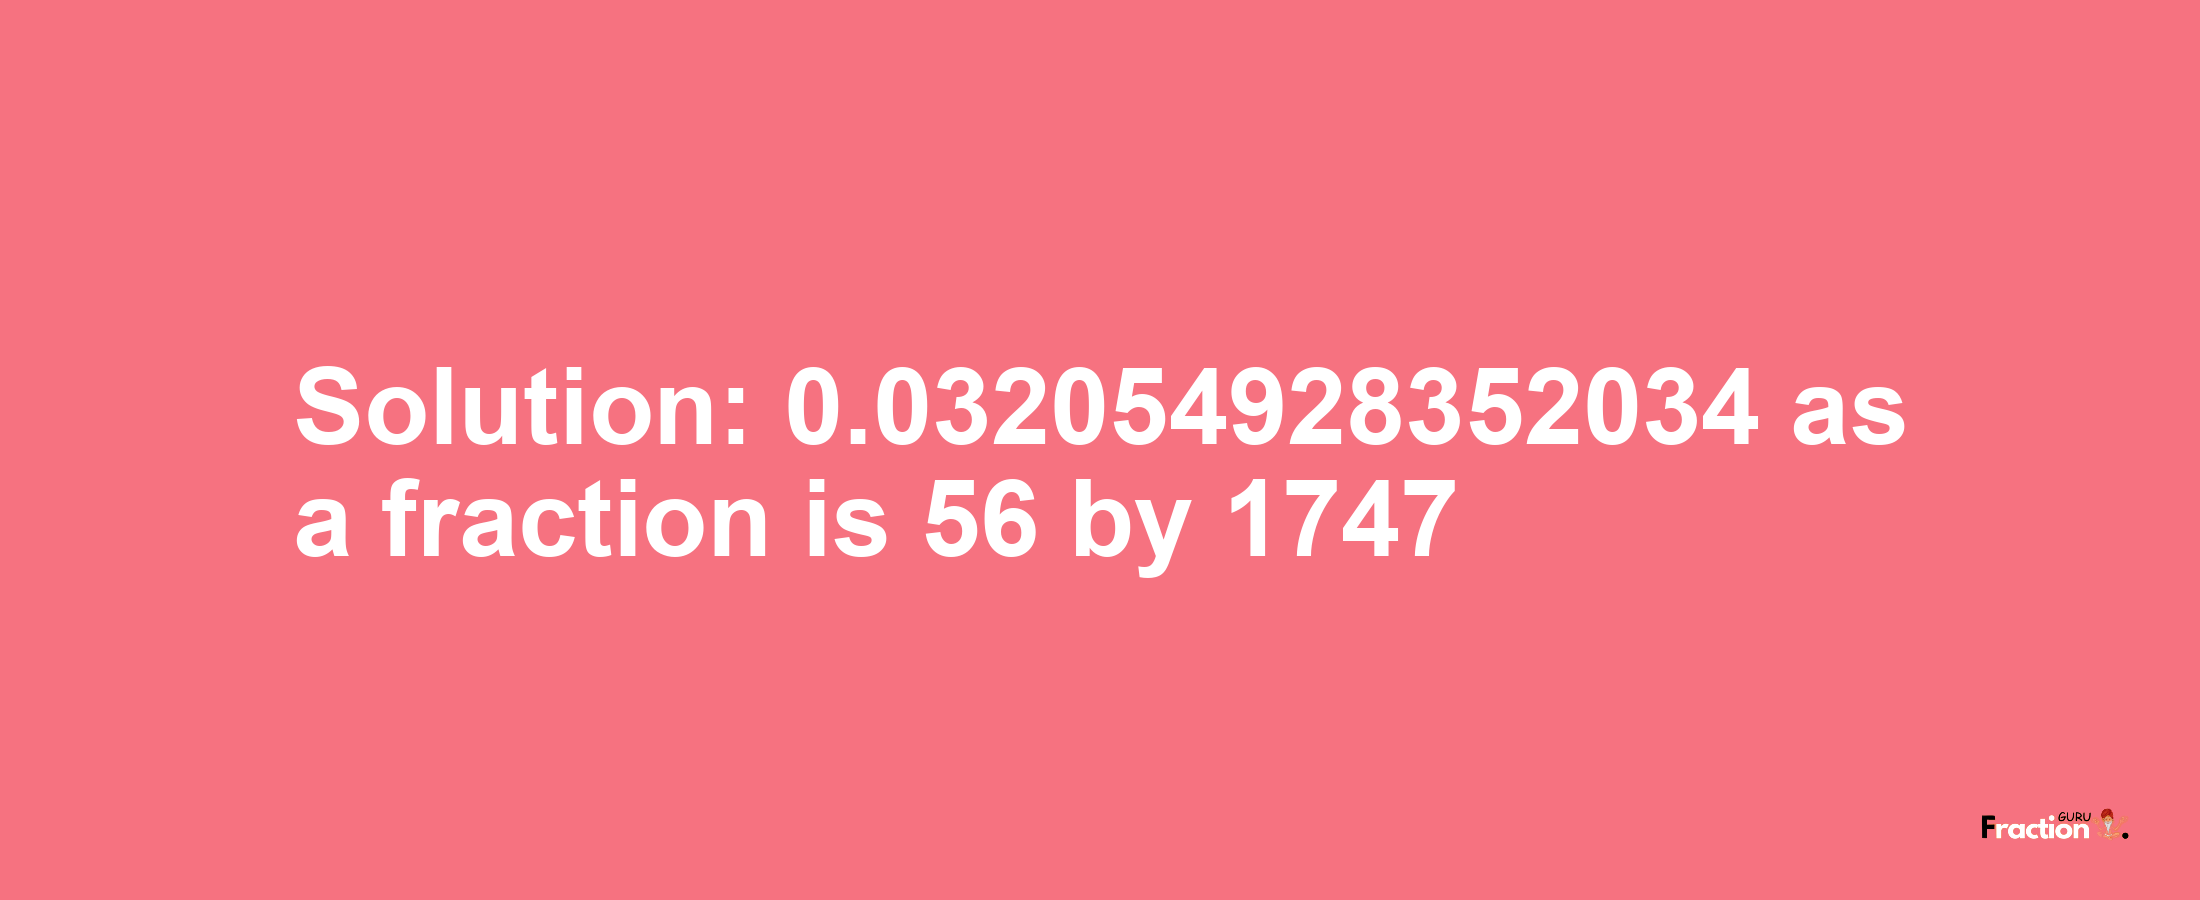 Solution:0.032054928352034 as a fraction is 56/1747